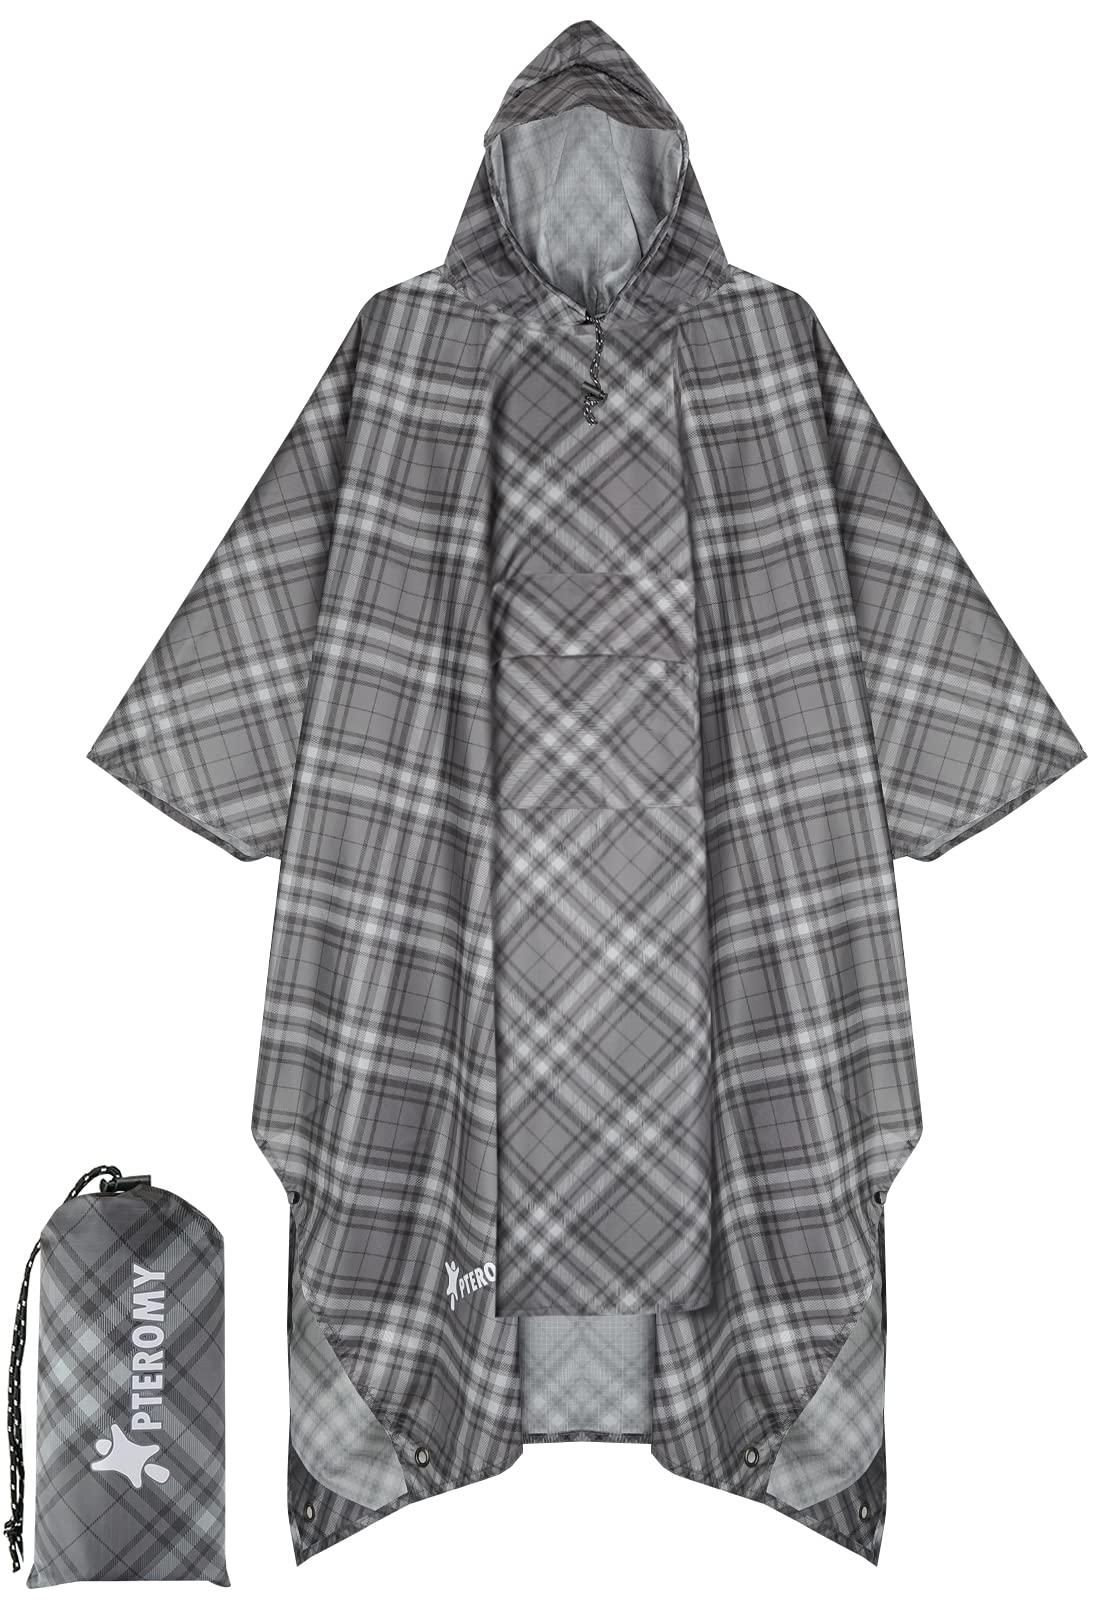 PTEROMY Hooded Rain Poncho for Adult with Pocket, Waterproof Lightweight Unisex Raincoat for Hiking Camping Emergency (Grey Grid)